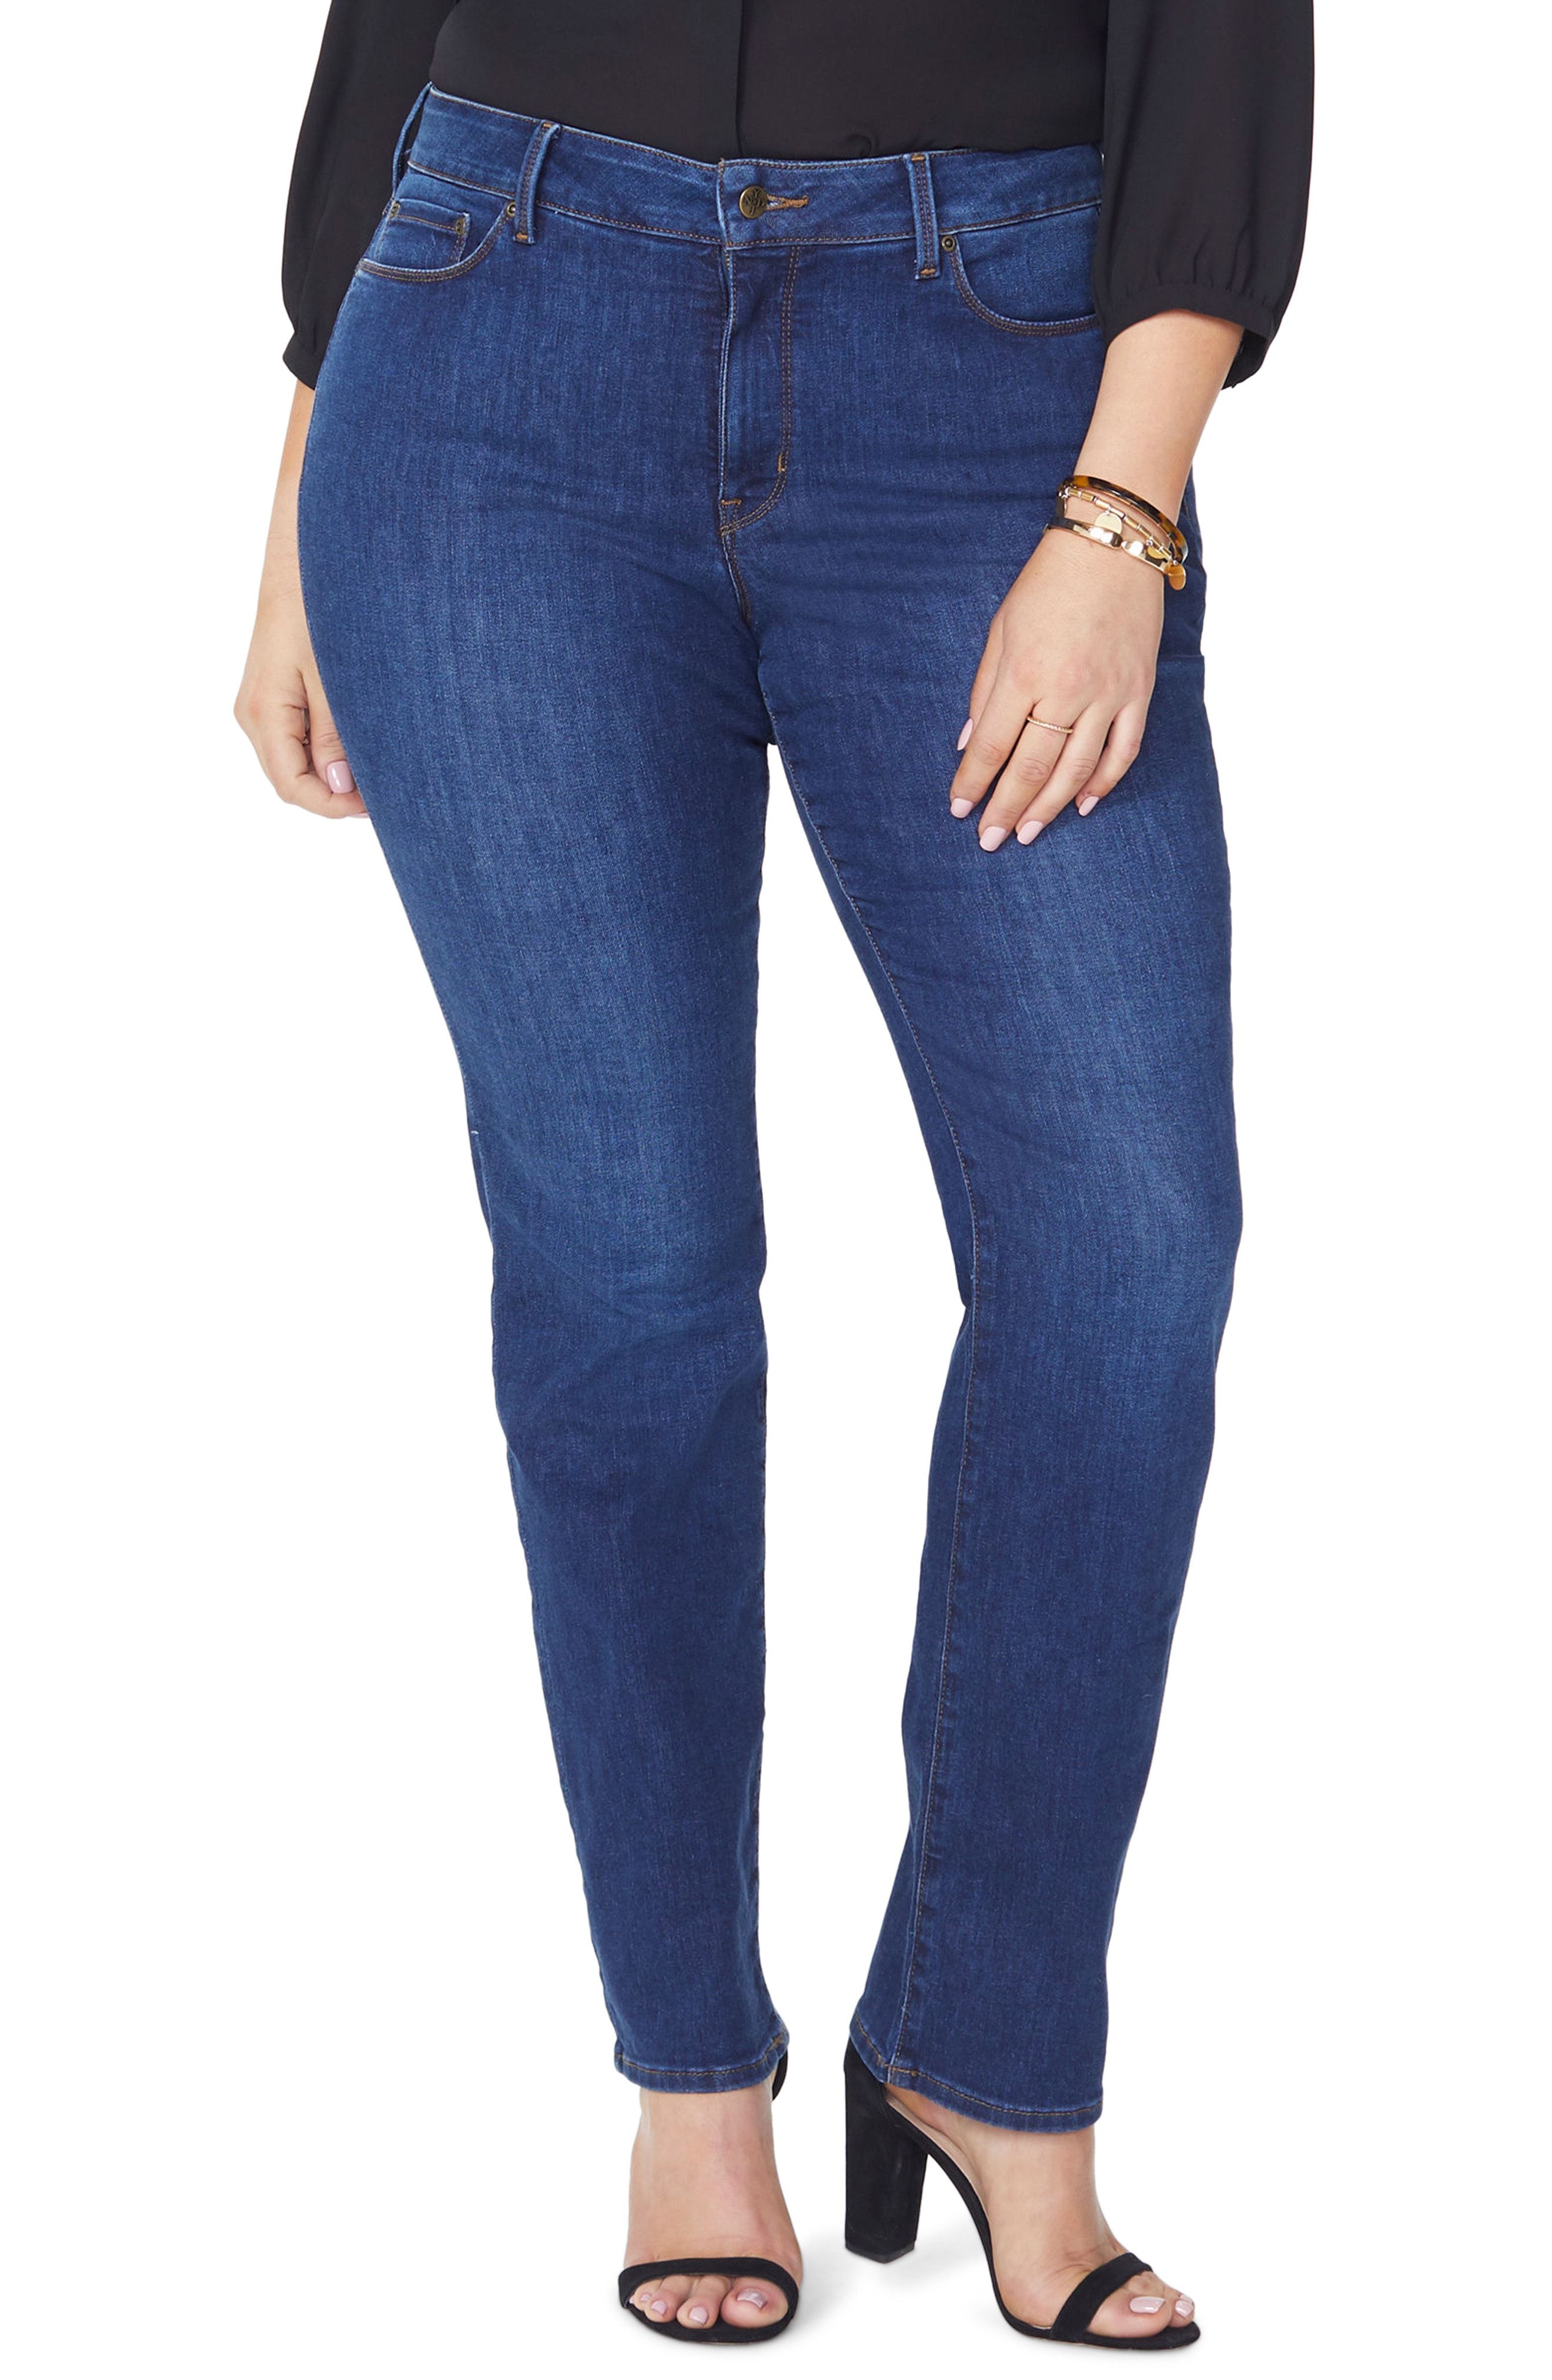 best jean for plus size